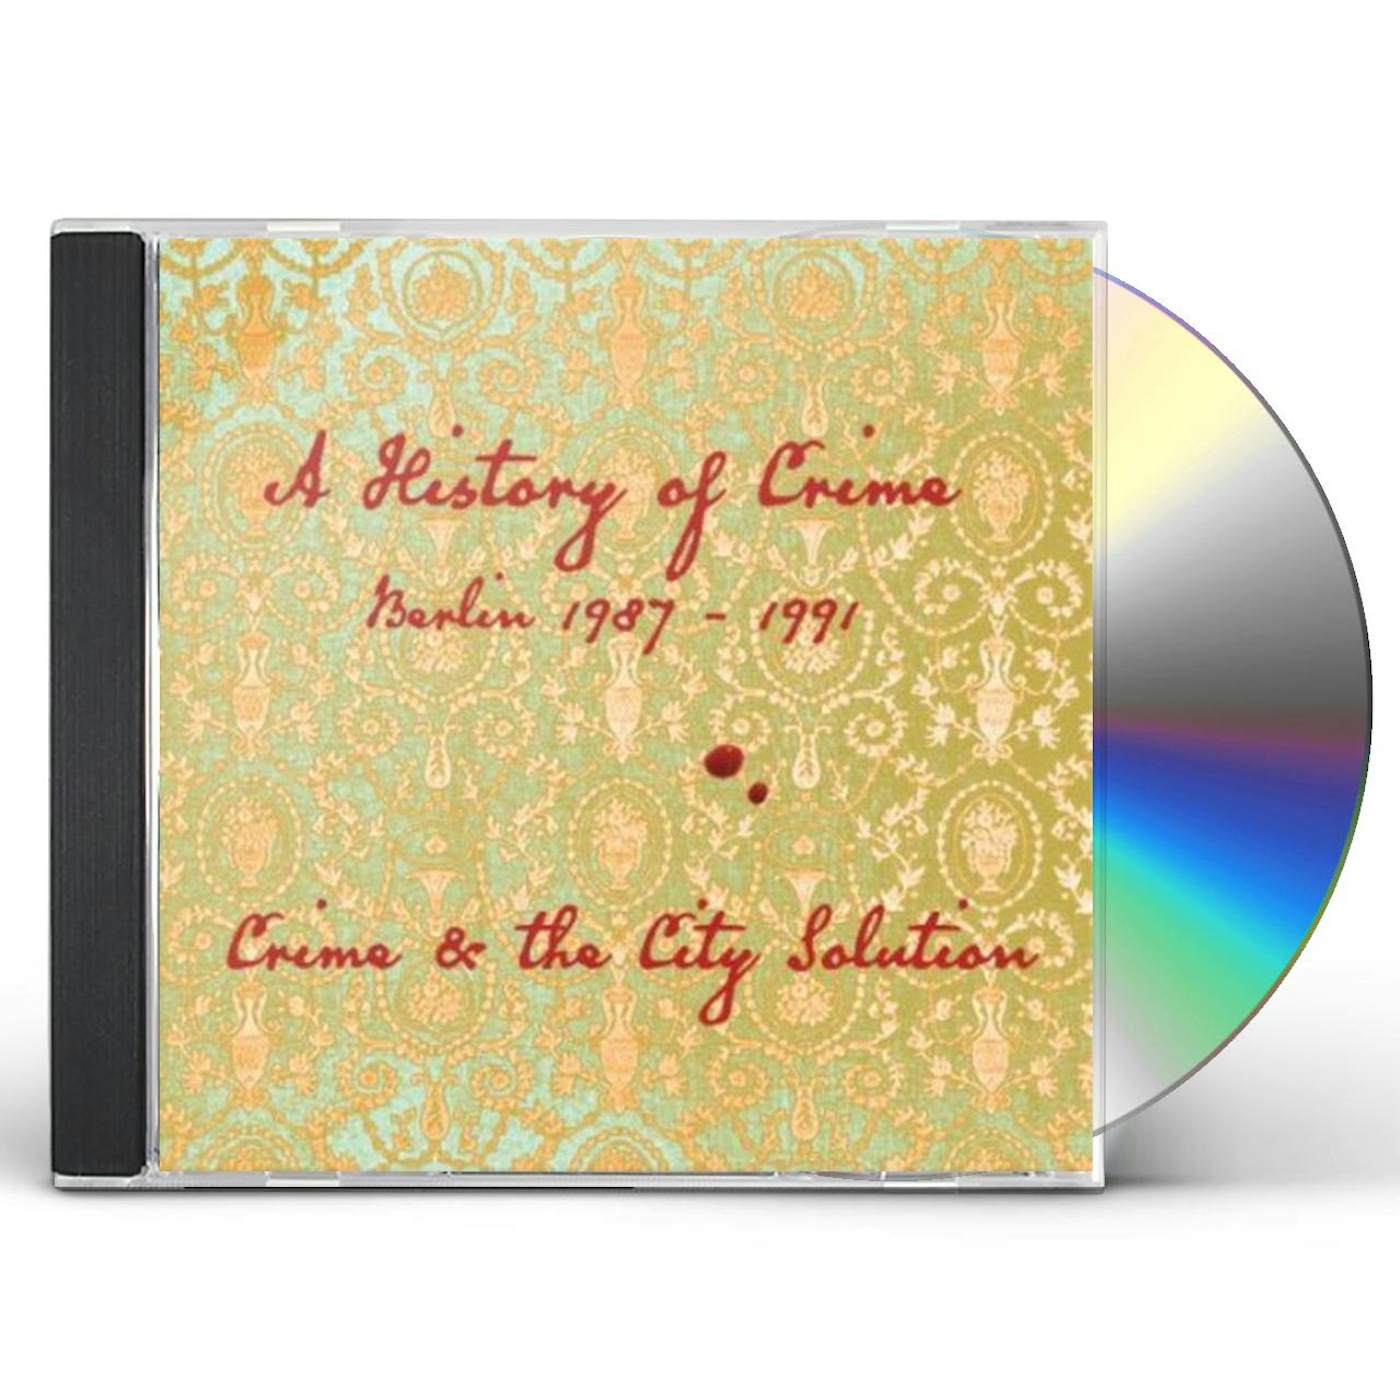 Crime & the City Solution AN INTRODUCTION TO CD